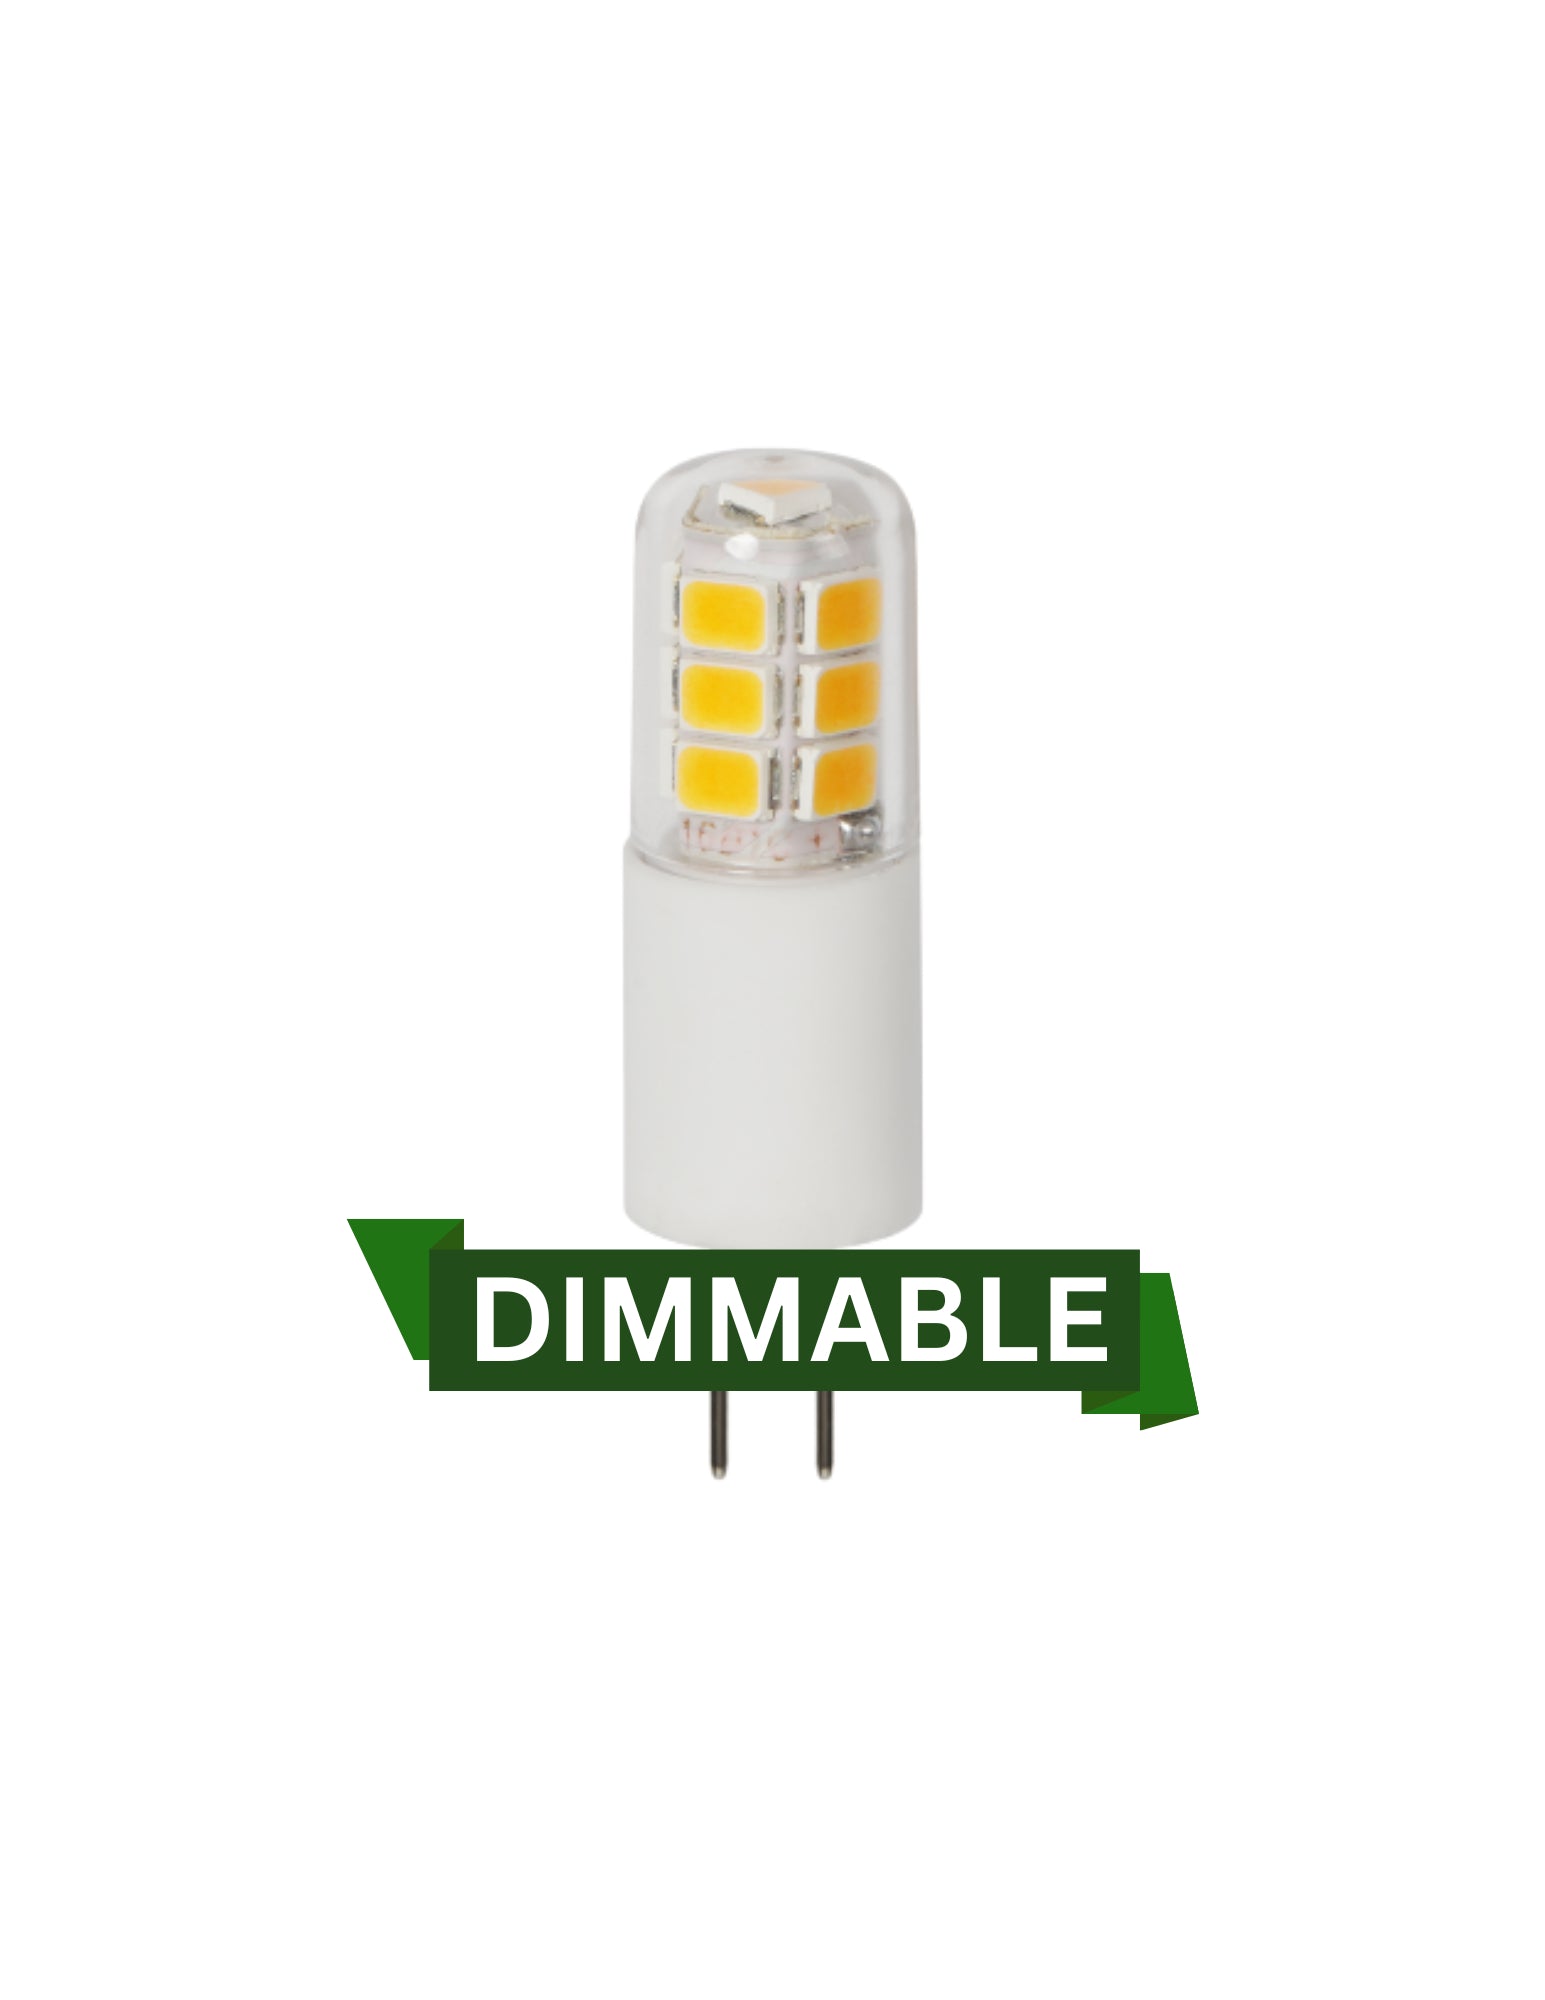 nabo kylling Med andre band G4 2W SMD LED Dimmable Light Bulb